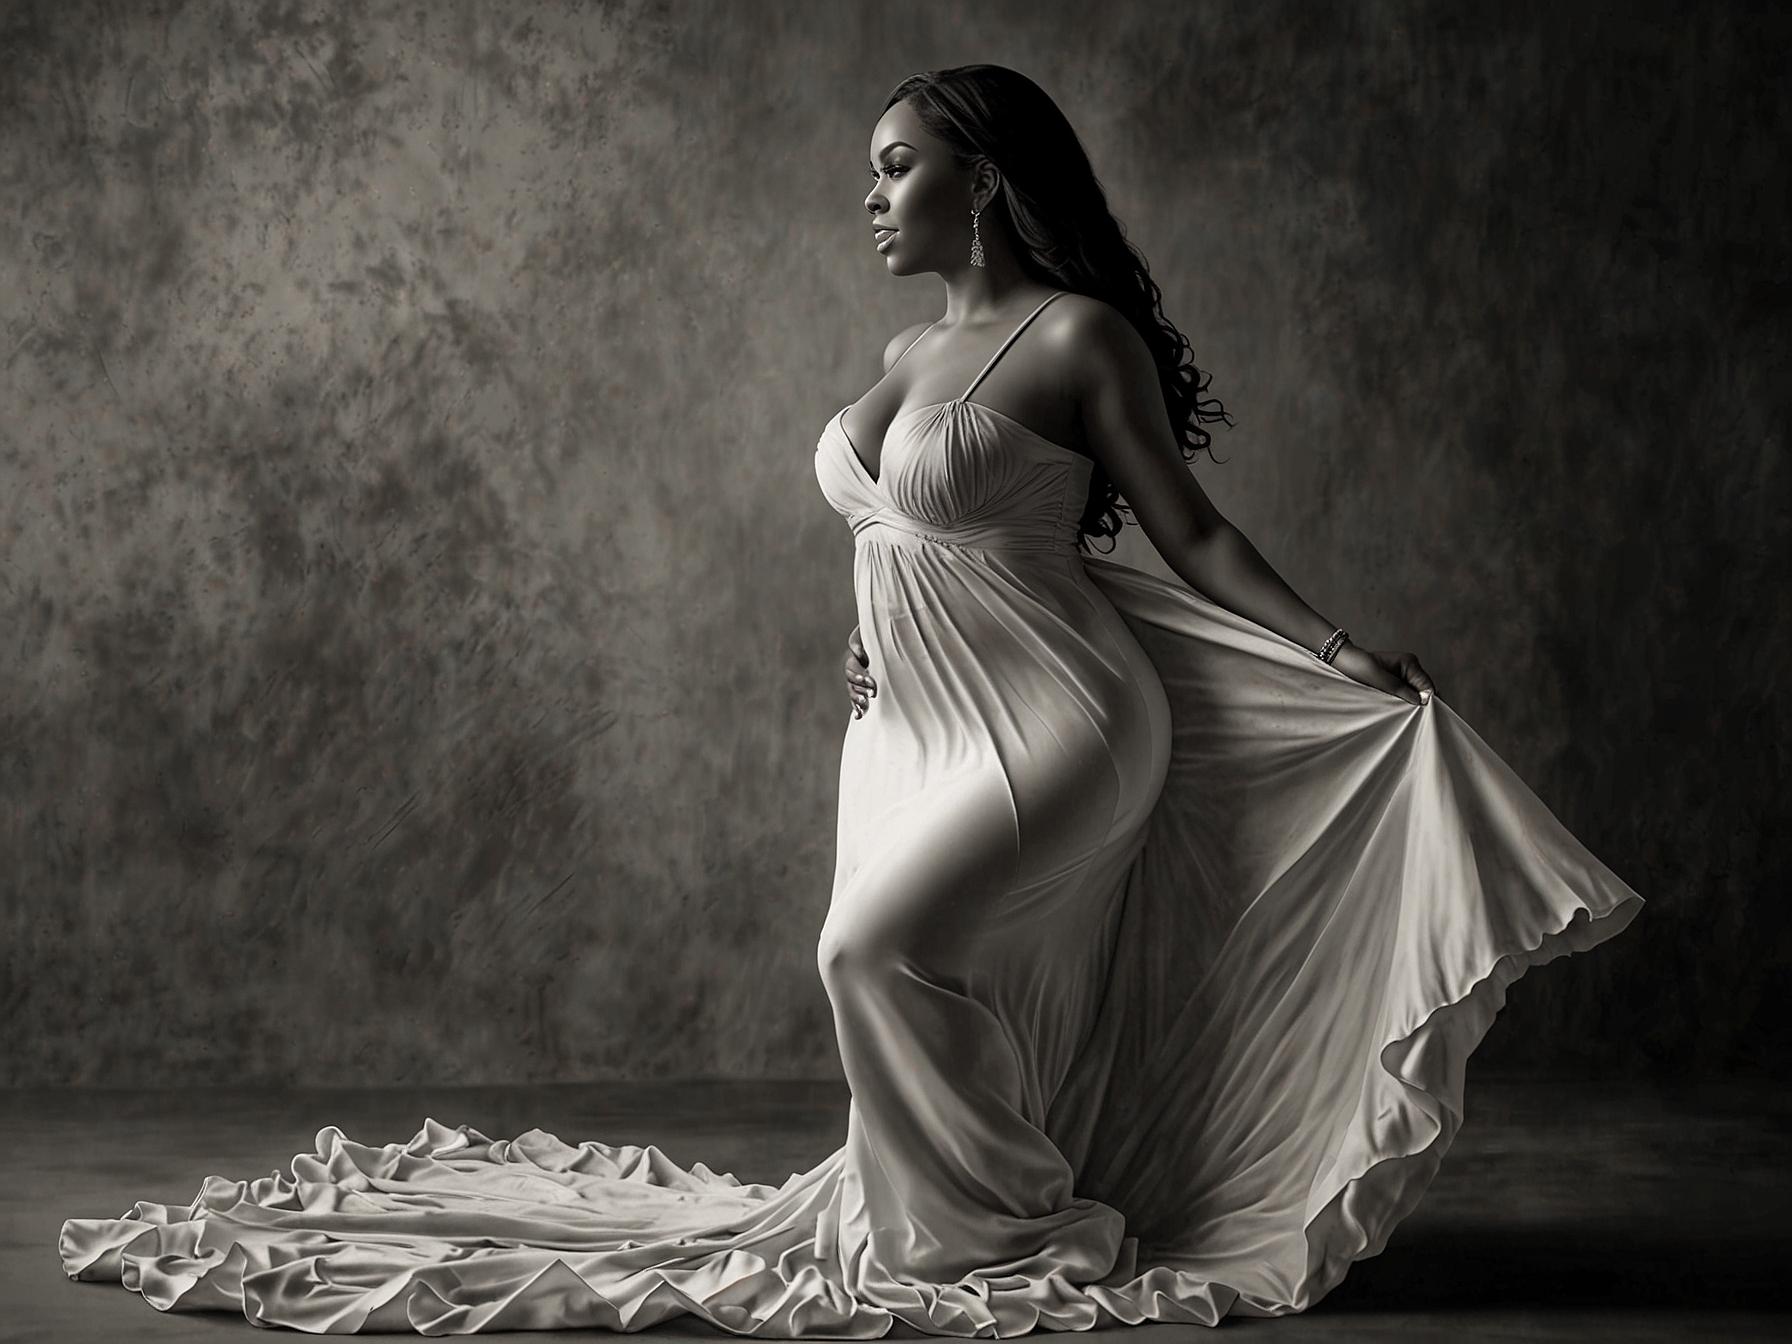 Ashanti stands gracefully in a flowing dress, her hand gently resting on her belly. The photo captures her joy and anticipation, symbolizing the beauty and excitement of becoming a mother.